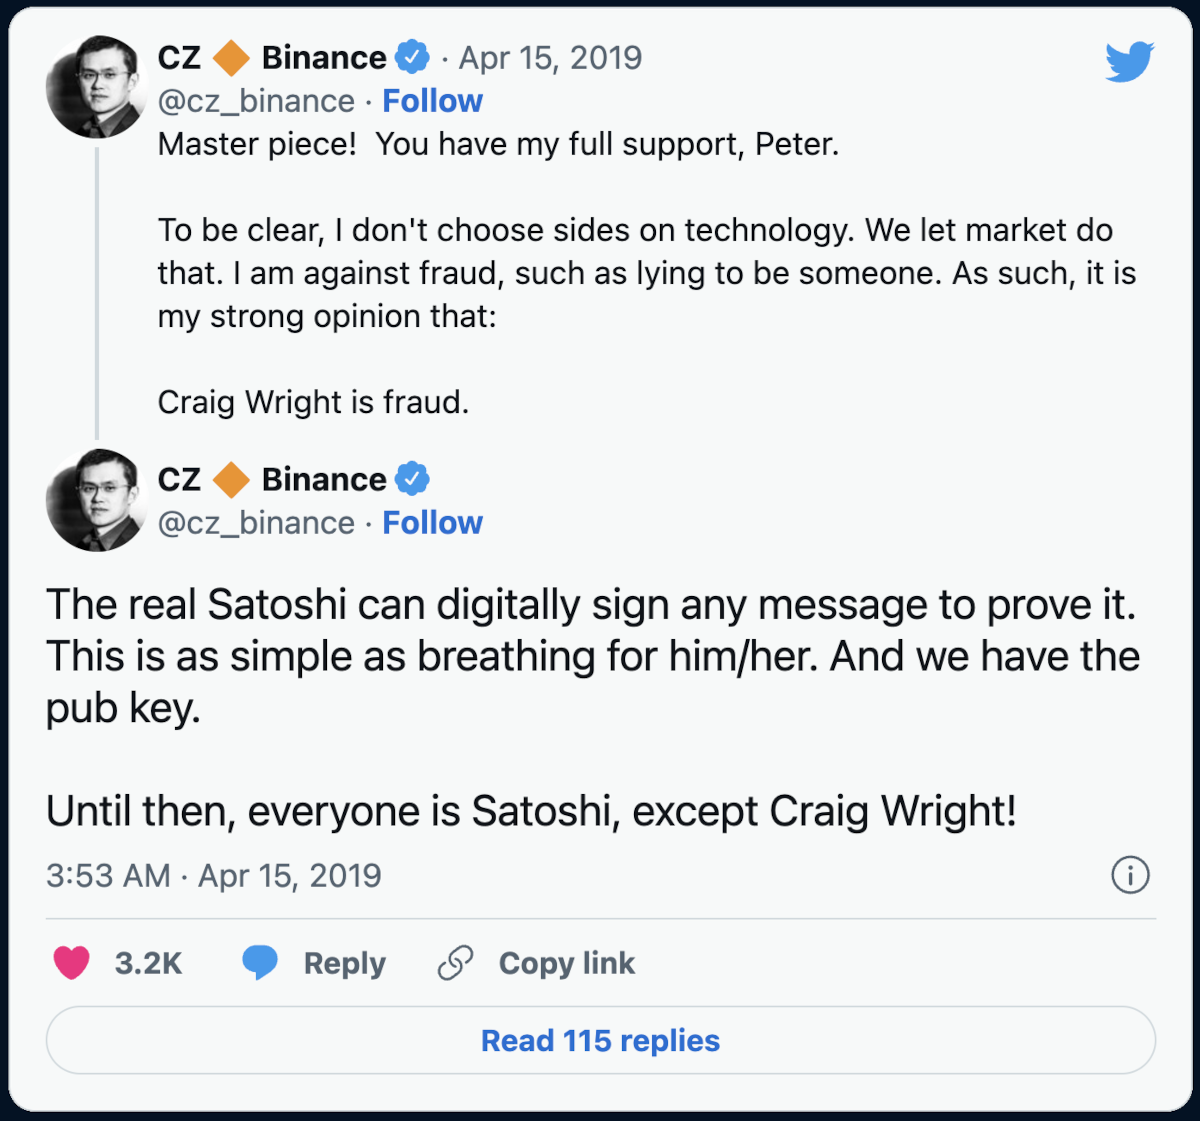 CZ Twitter post commenting on Craig Wright's claims as the founder of Bitcoin, Satoshi Nakamoto.